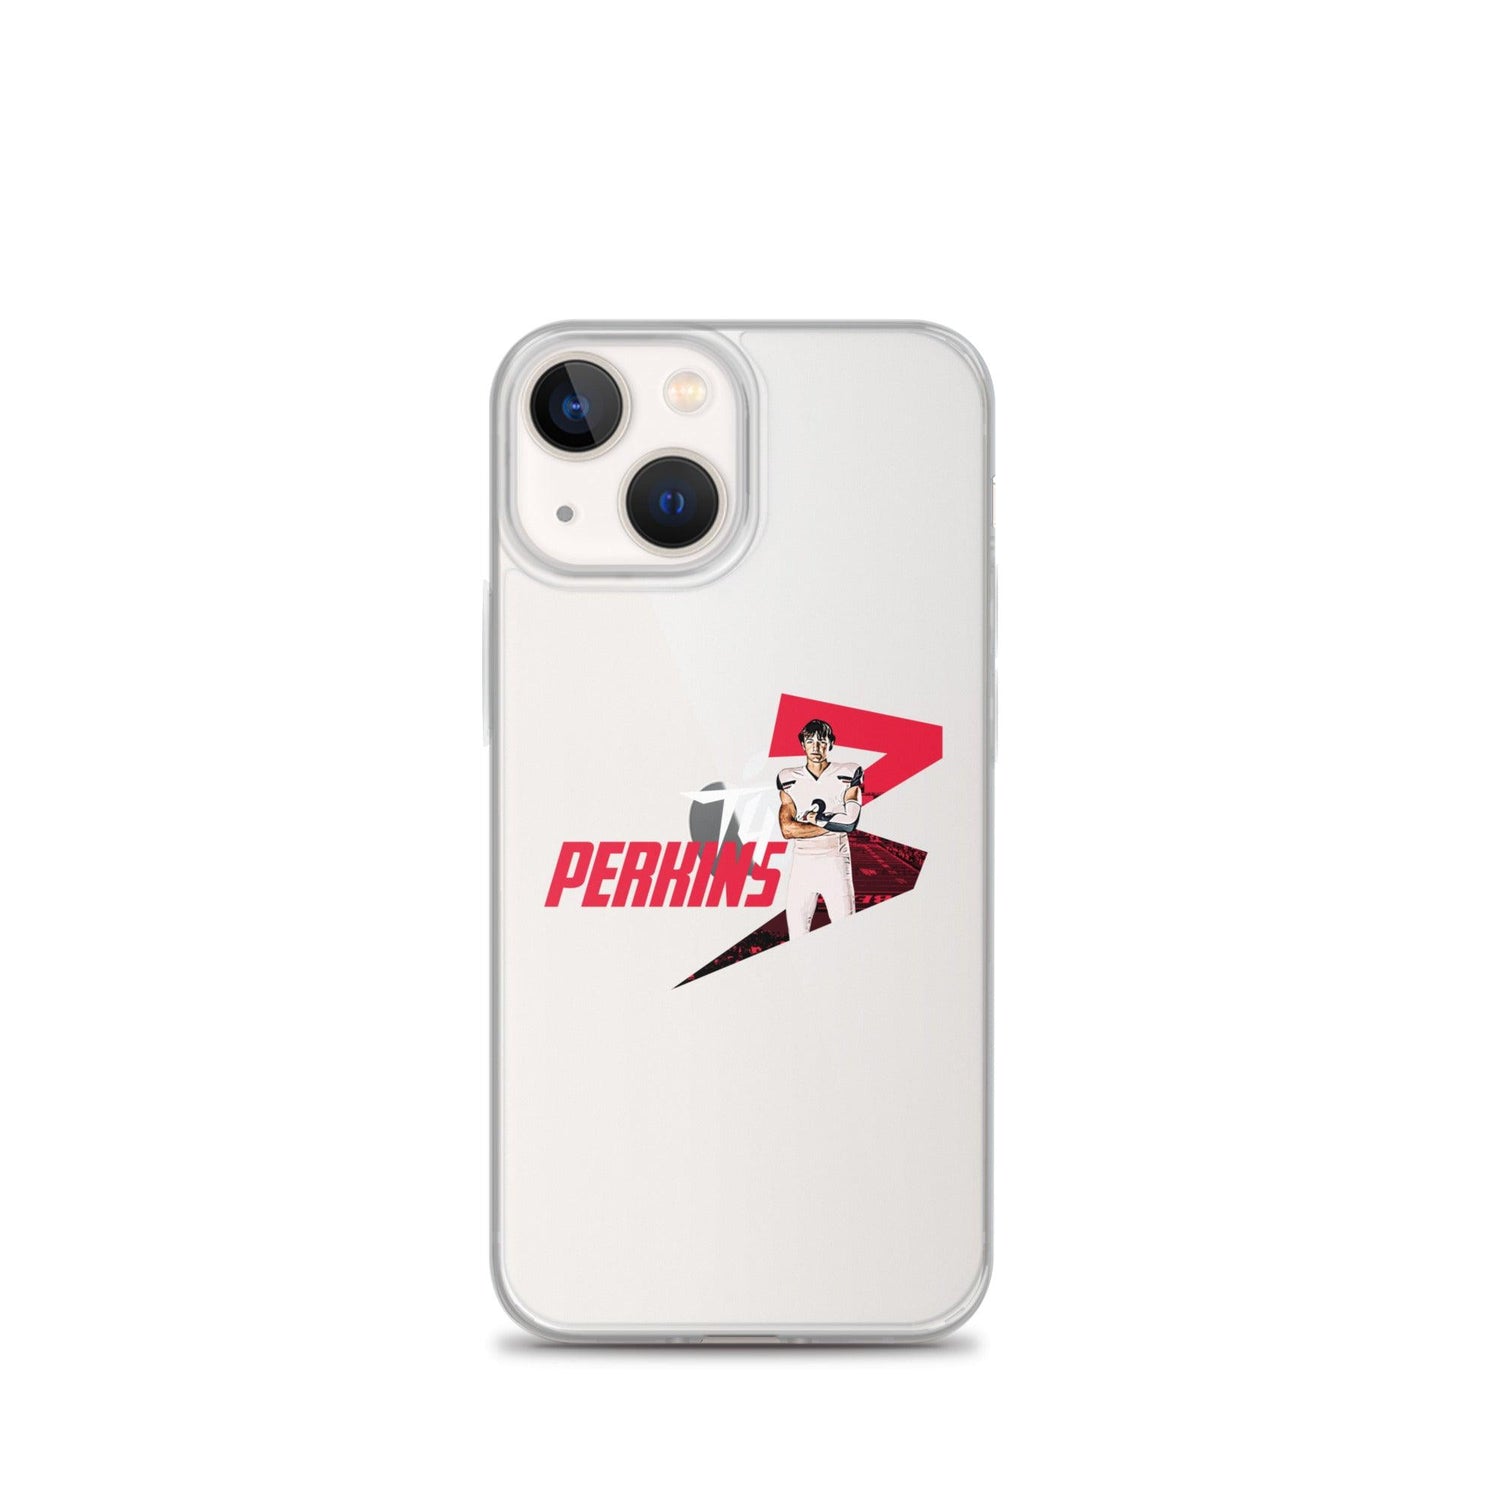 Ty Perkins "Gameday" iPhone Case - Fan Arch